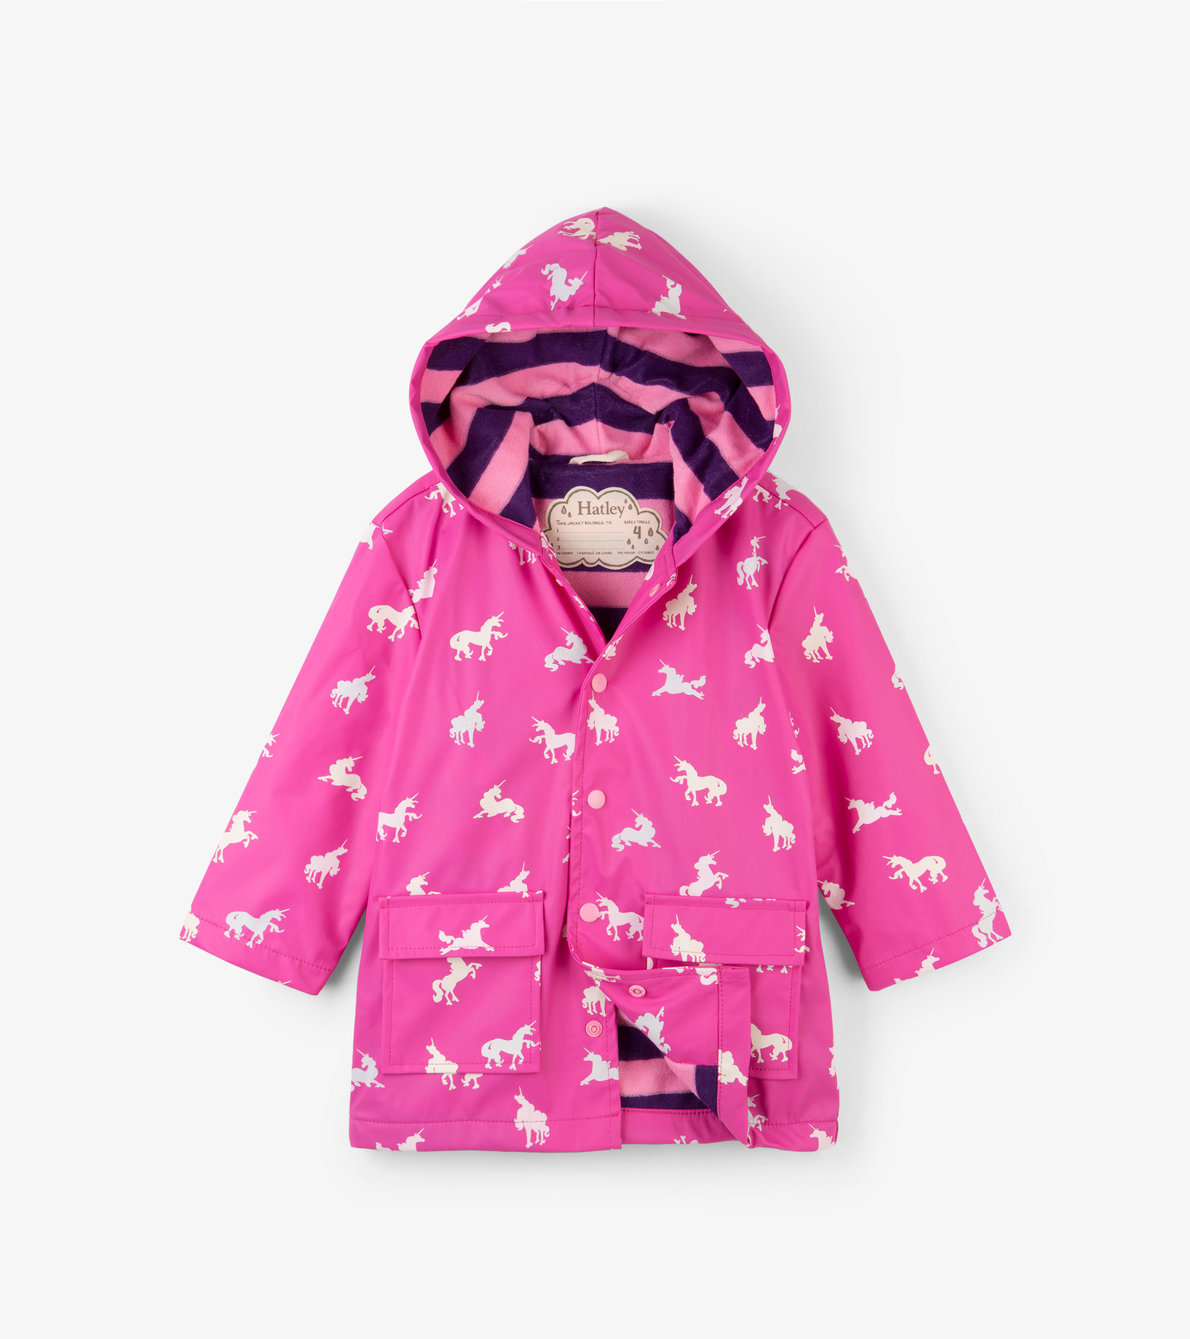 View larger image of Colour Changing Unicorn Silhouettes Raincoat